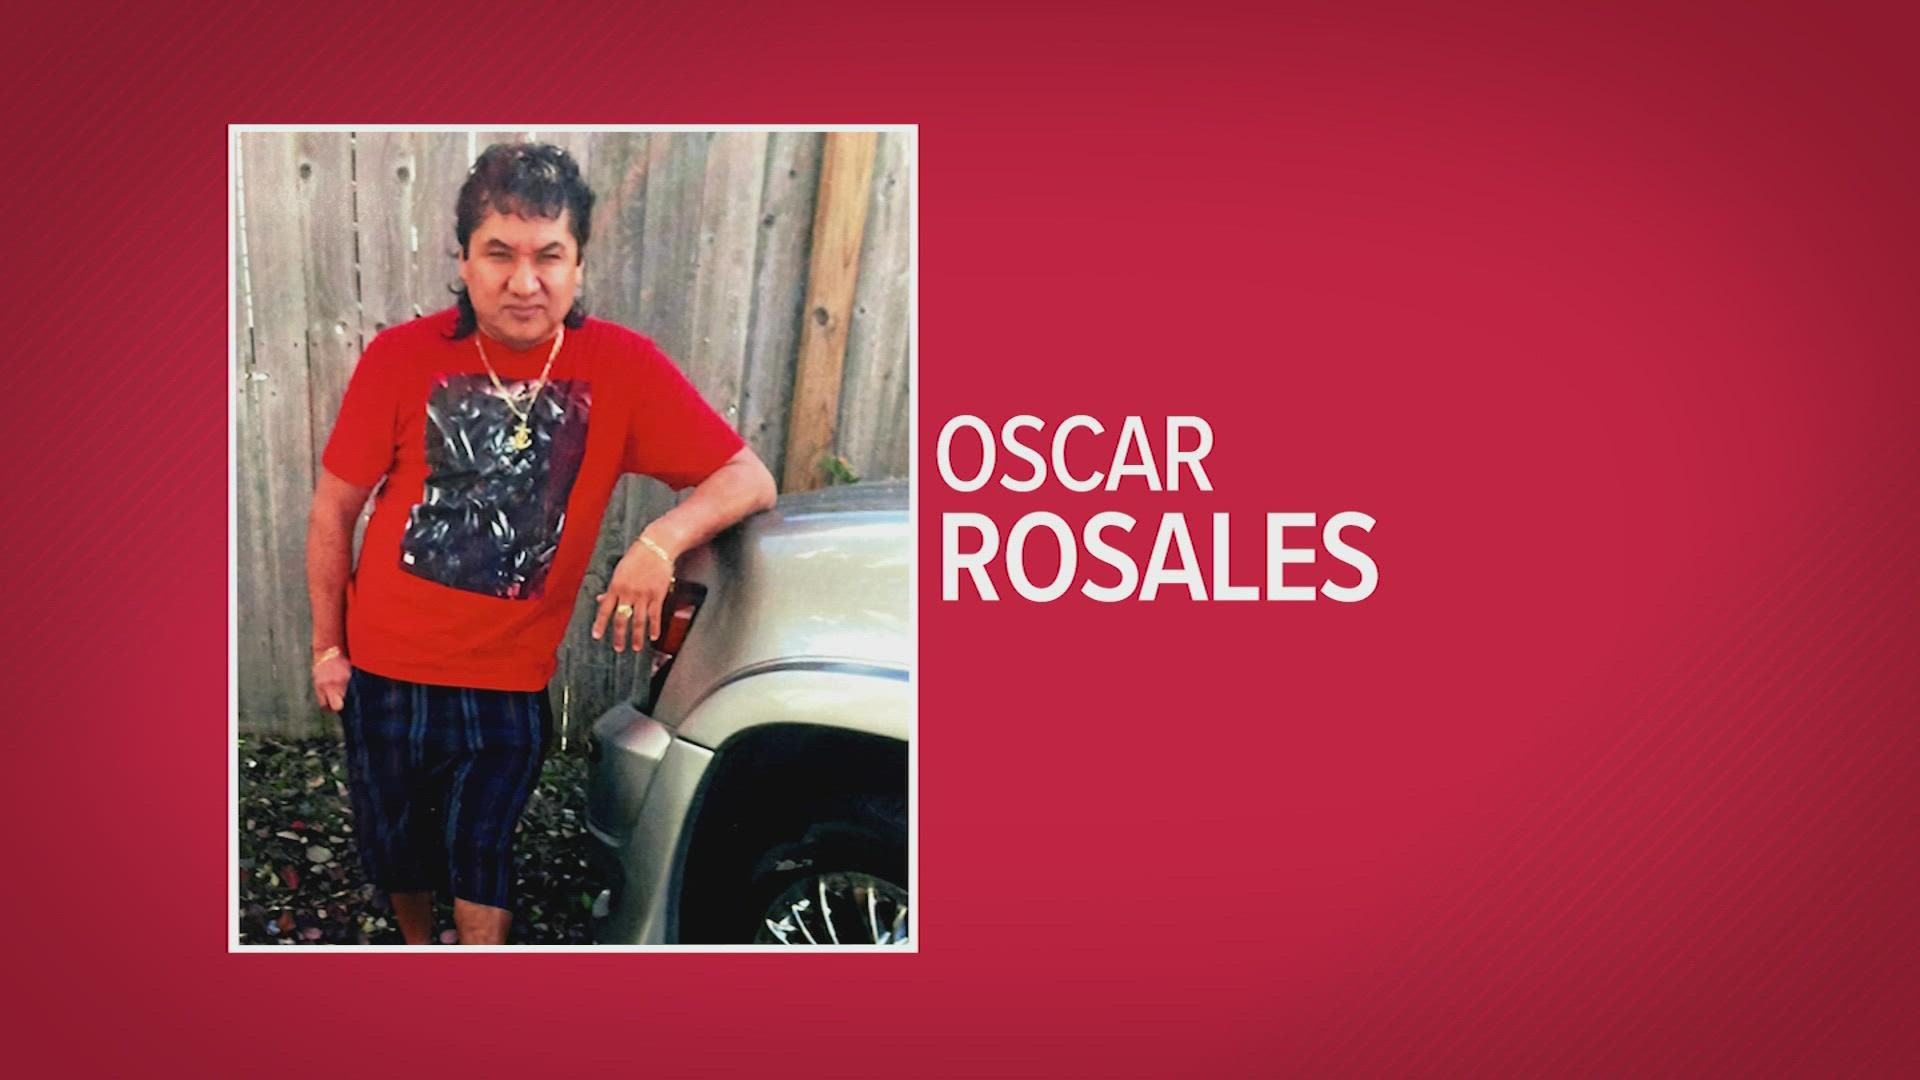 A $60,000 reward is being offered for 51-year-old Oscar Rosales, identified by HPD as the shooter who gunned down Precinct 5 Cpl. Charles Galloway.